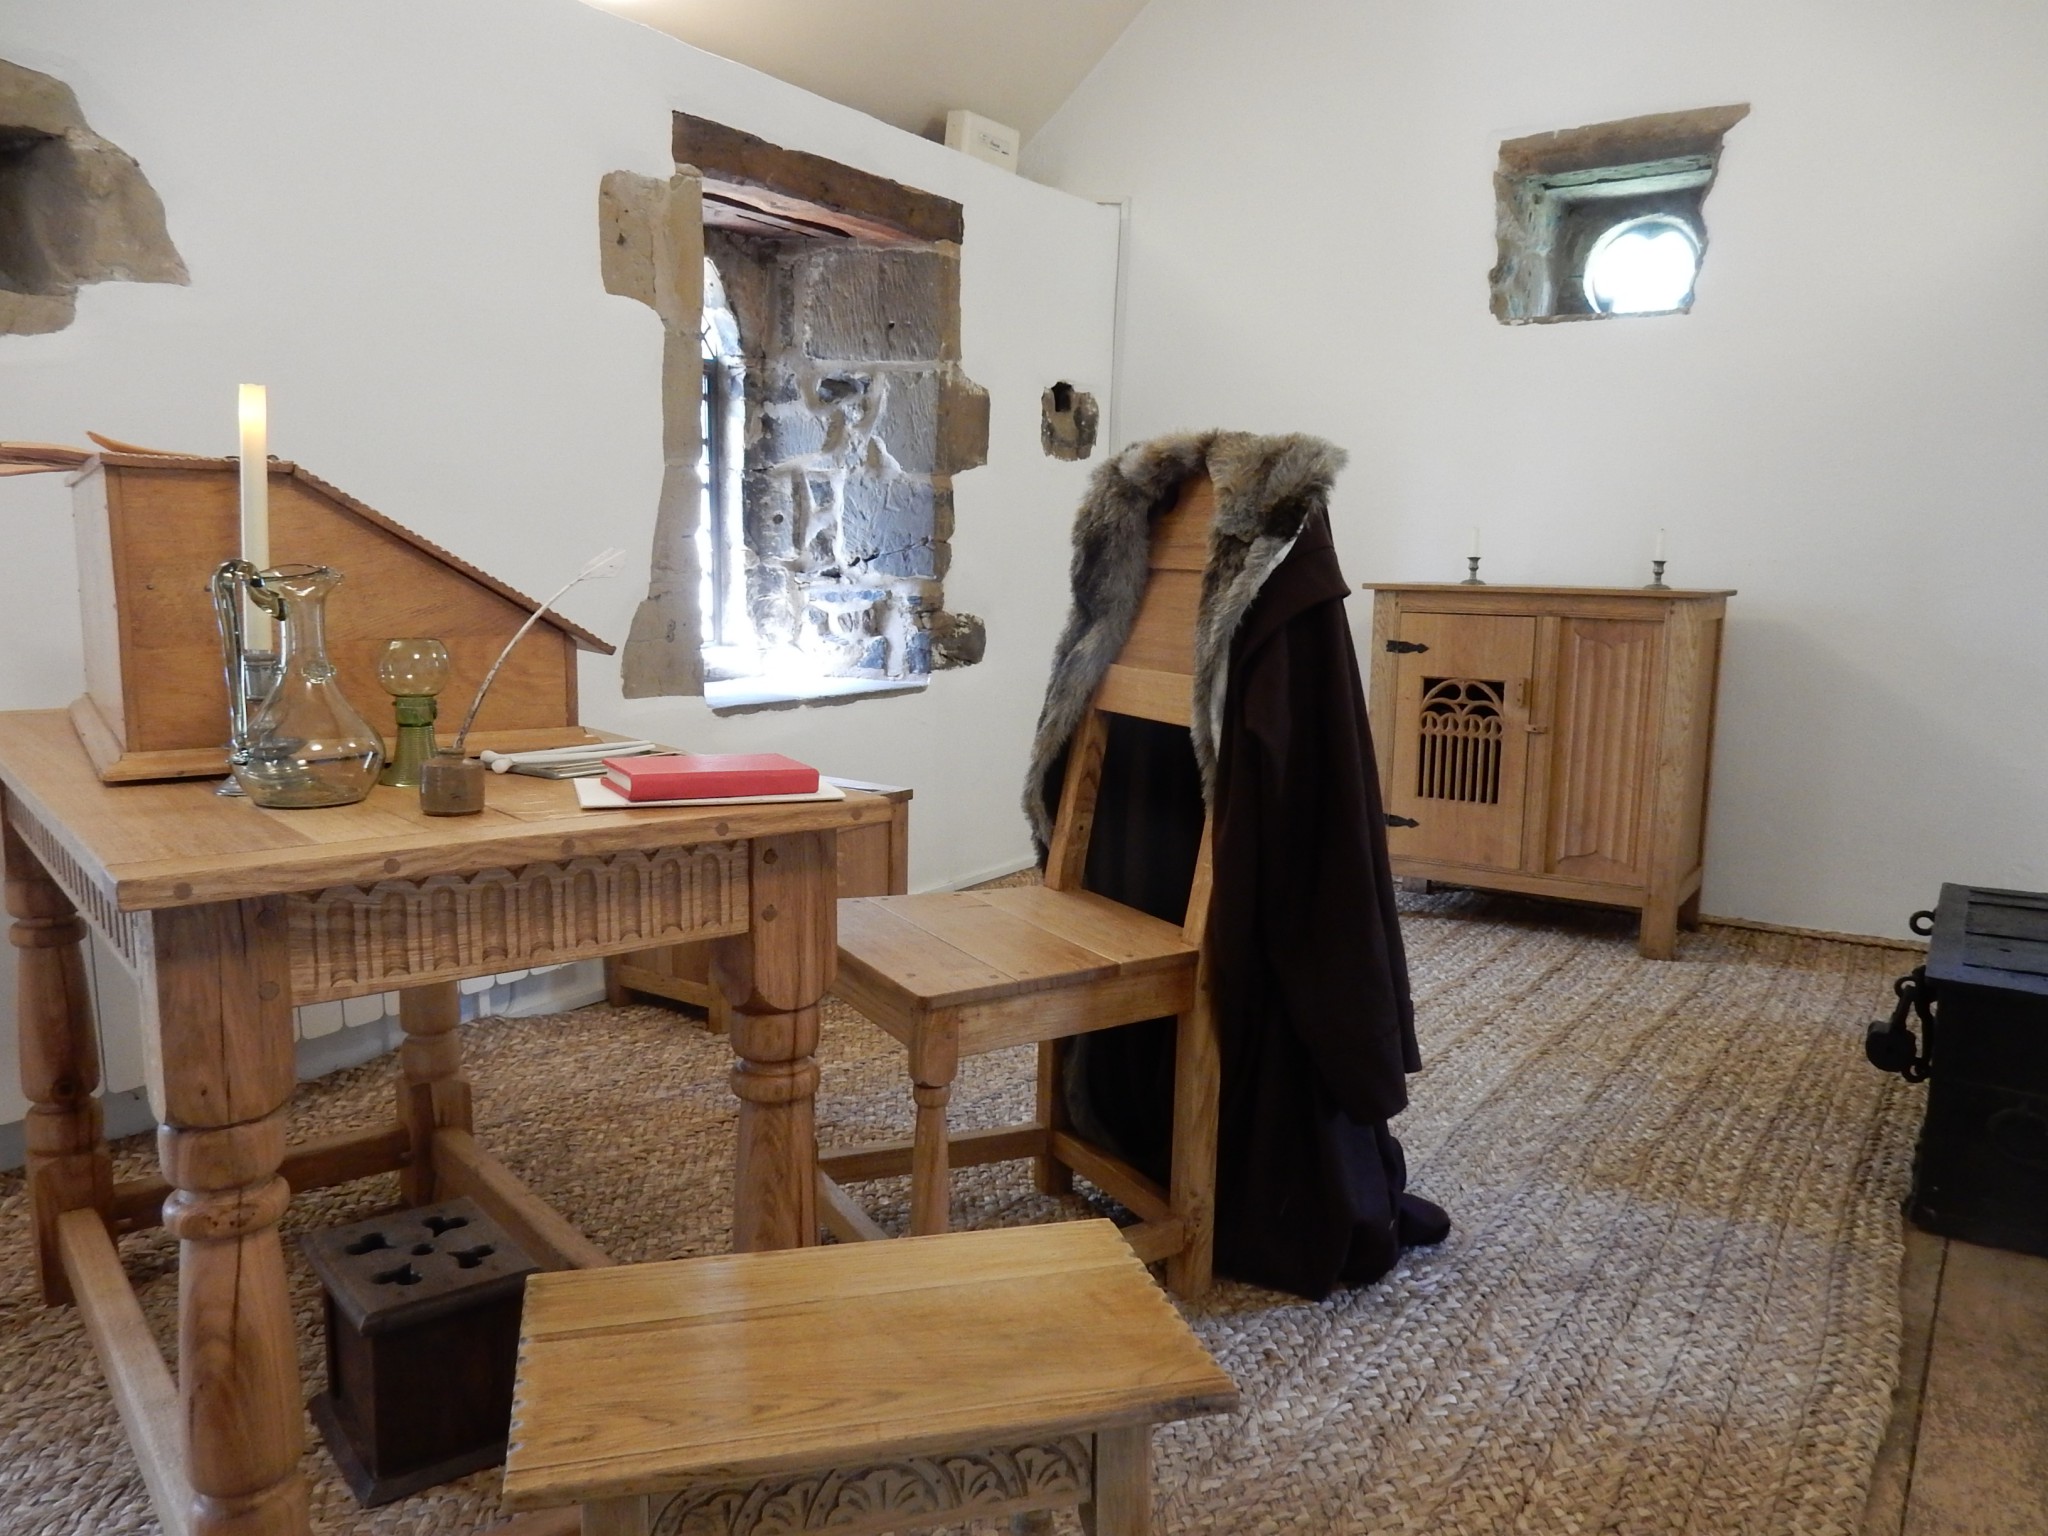 Guided Tours of the 1620s House